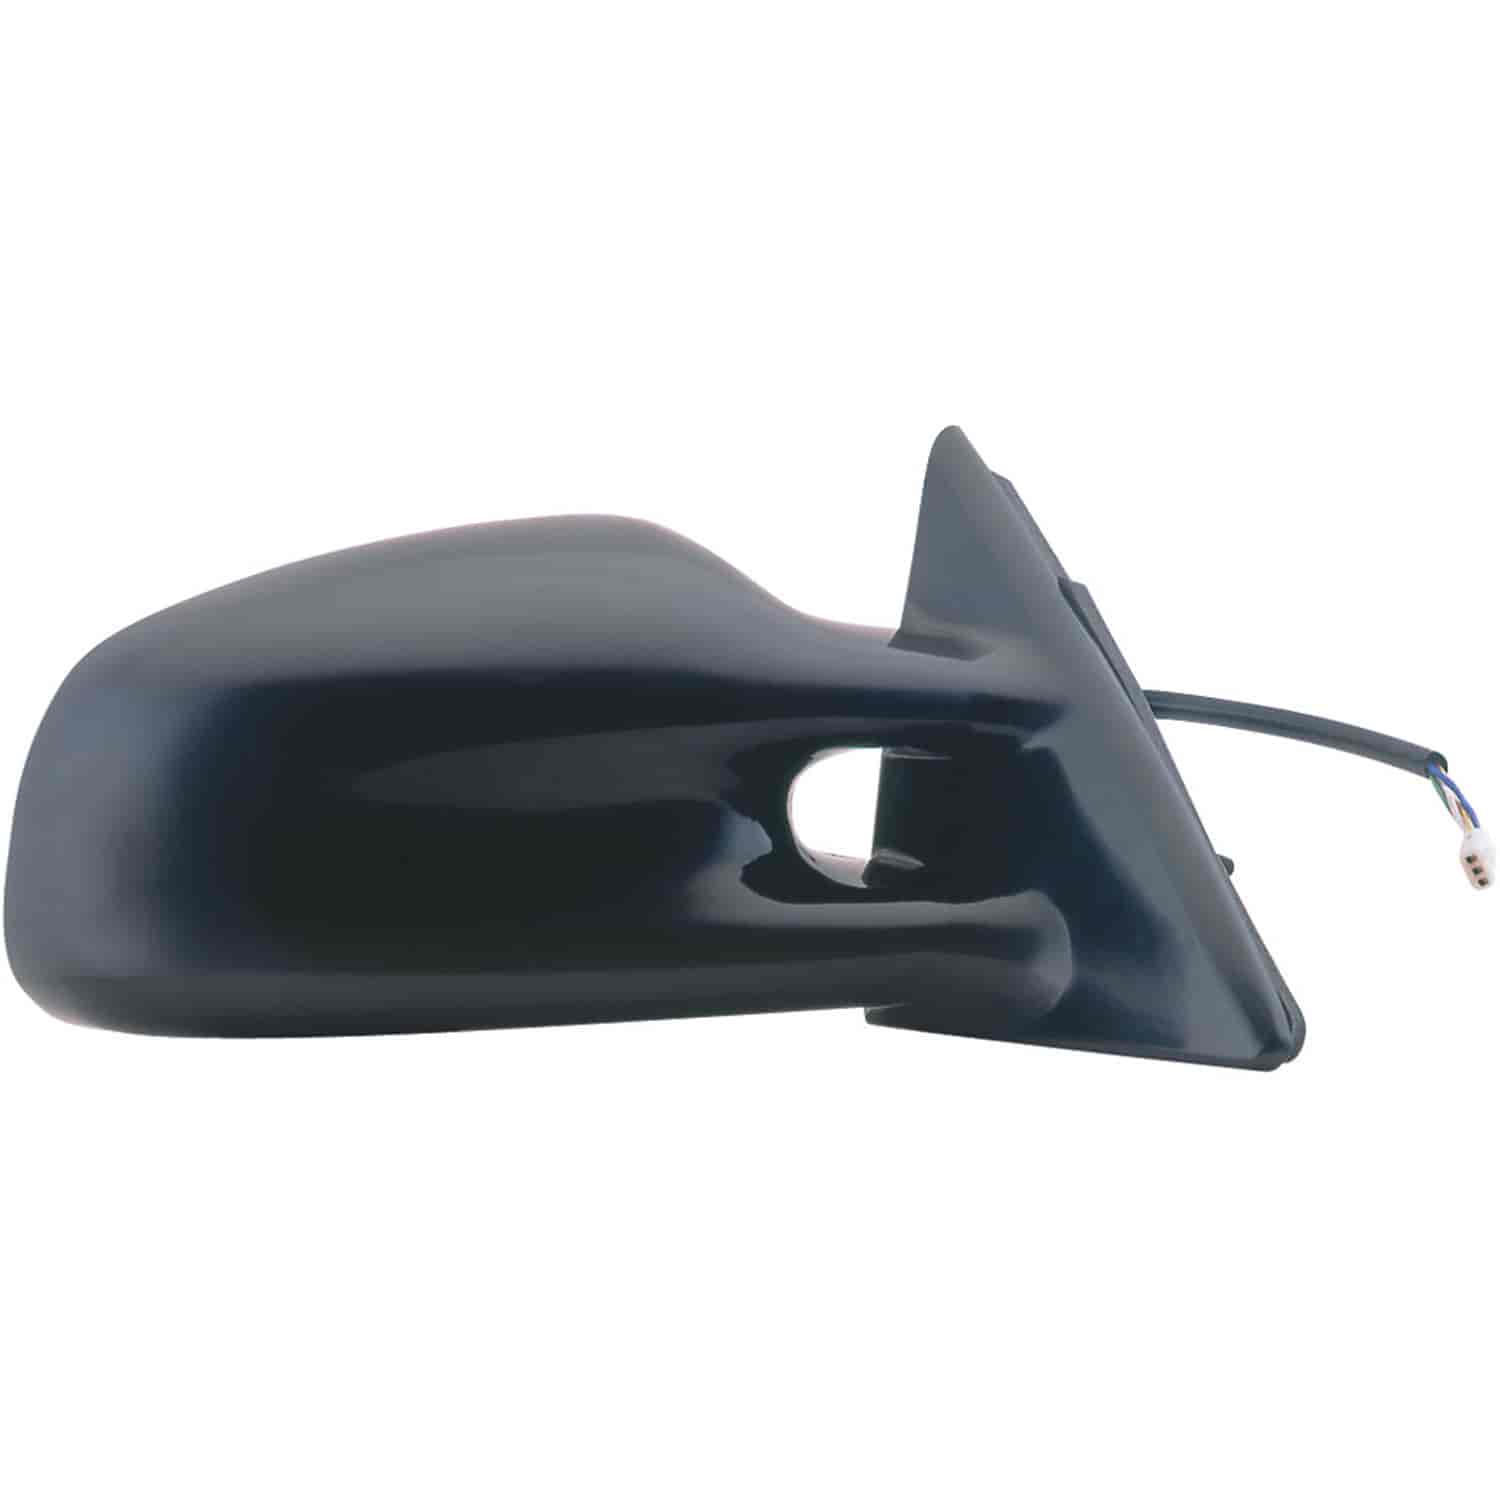 OEM Style Replacement mirror for 99-02 Pontiac Grand Am SE Model; Pontiac Grand Am GT Model passenge